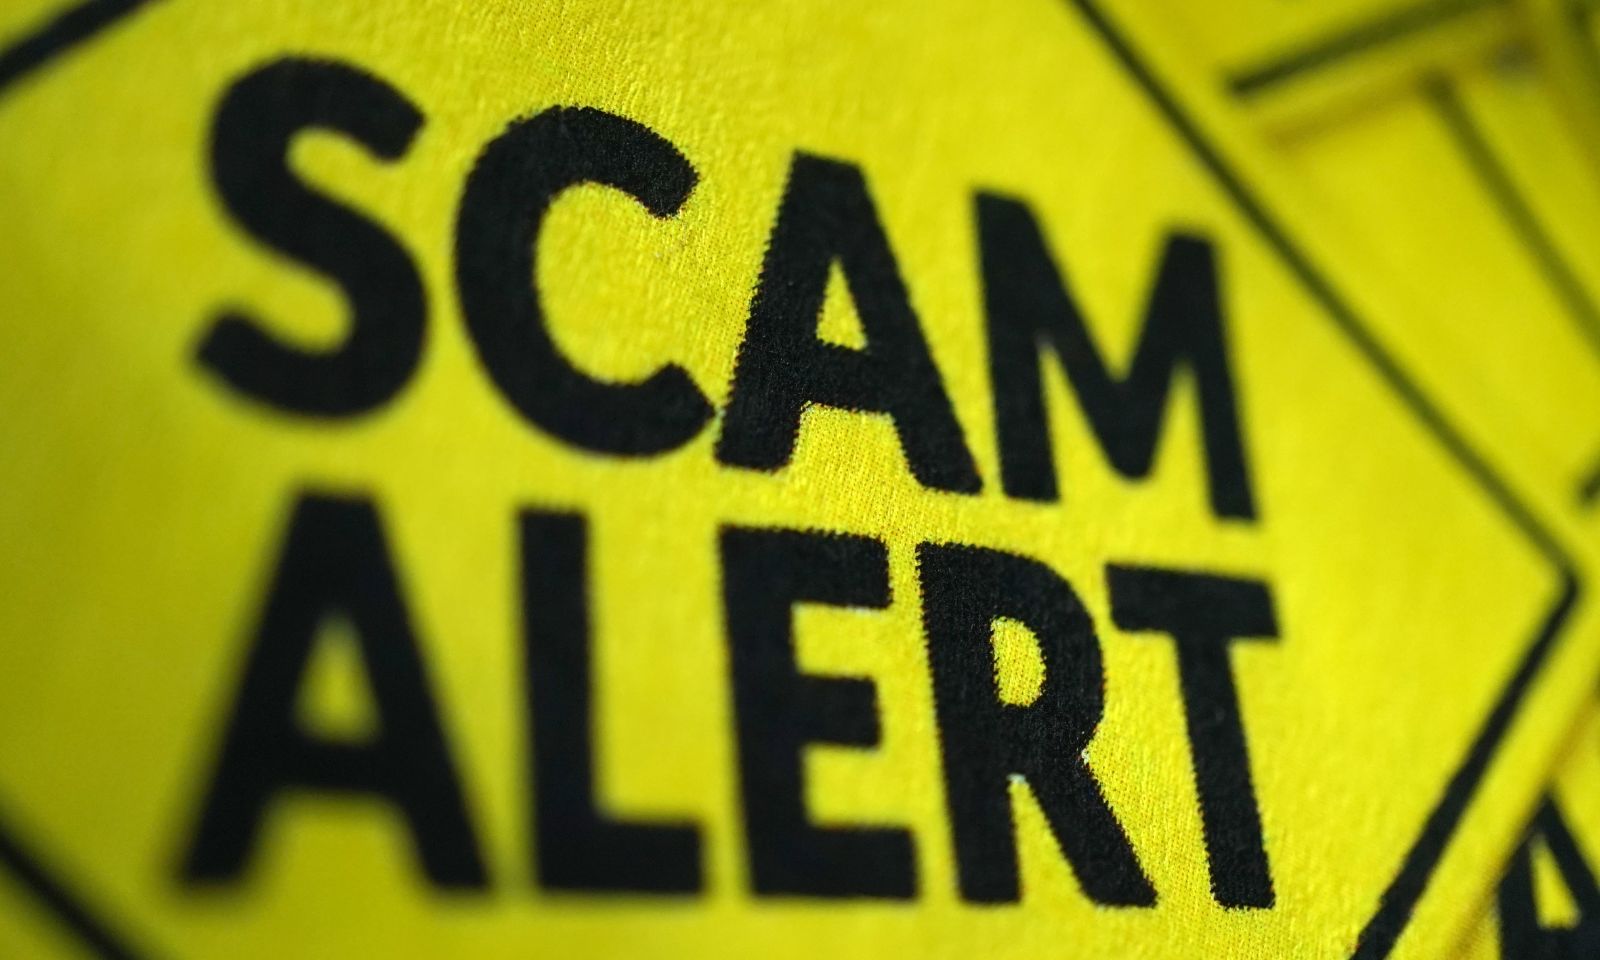 100+ Ahmedabad Engineering Students Caught in Loan Scam Linked to Dubious Gurgaon Startup